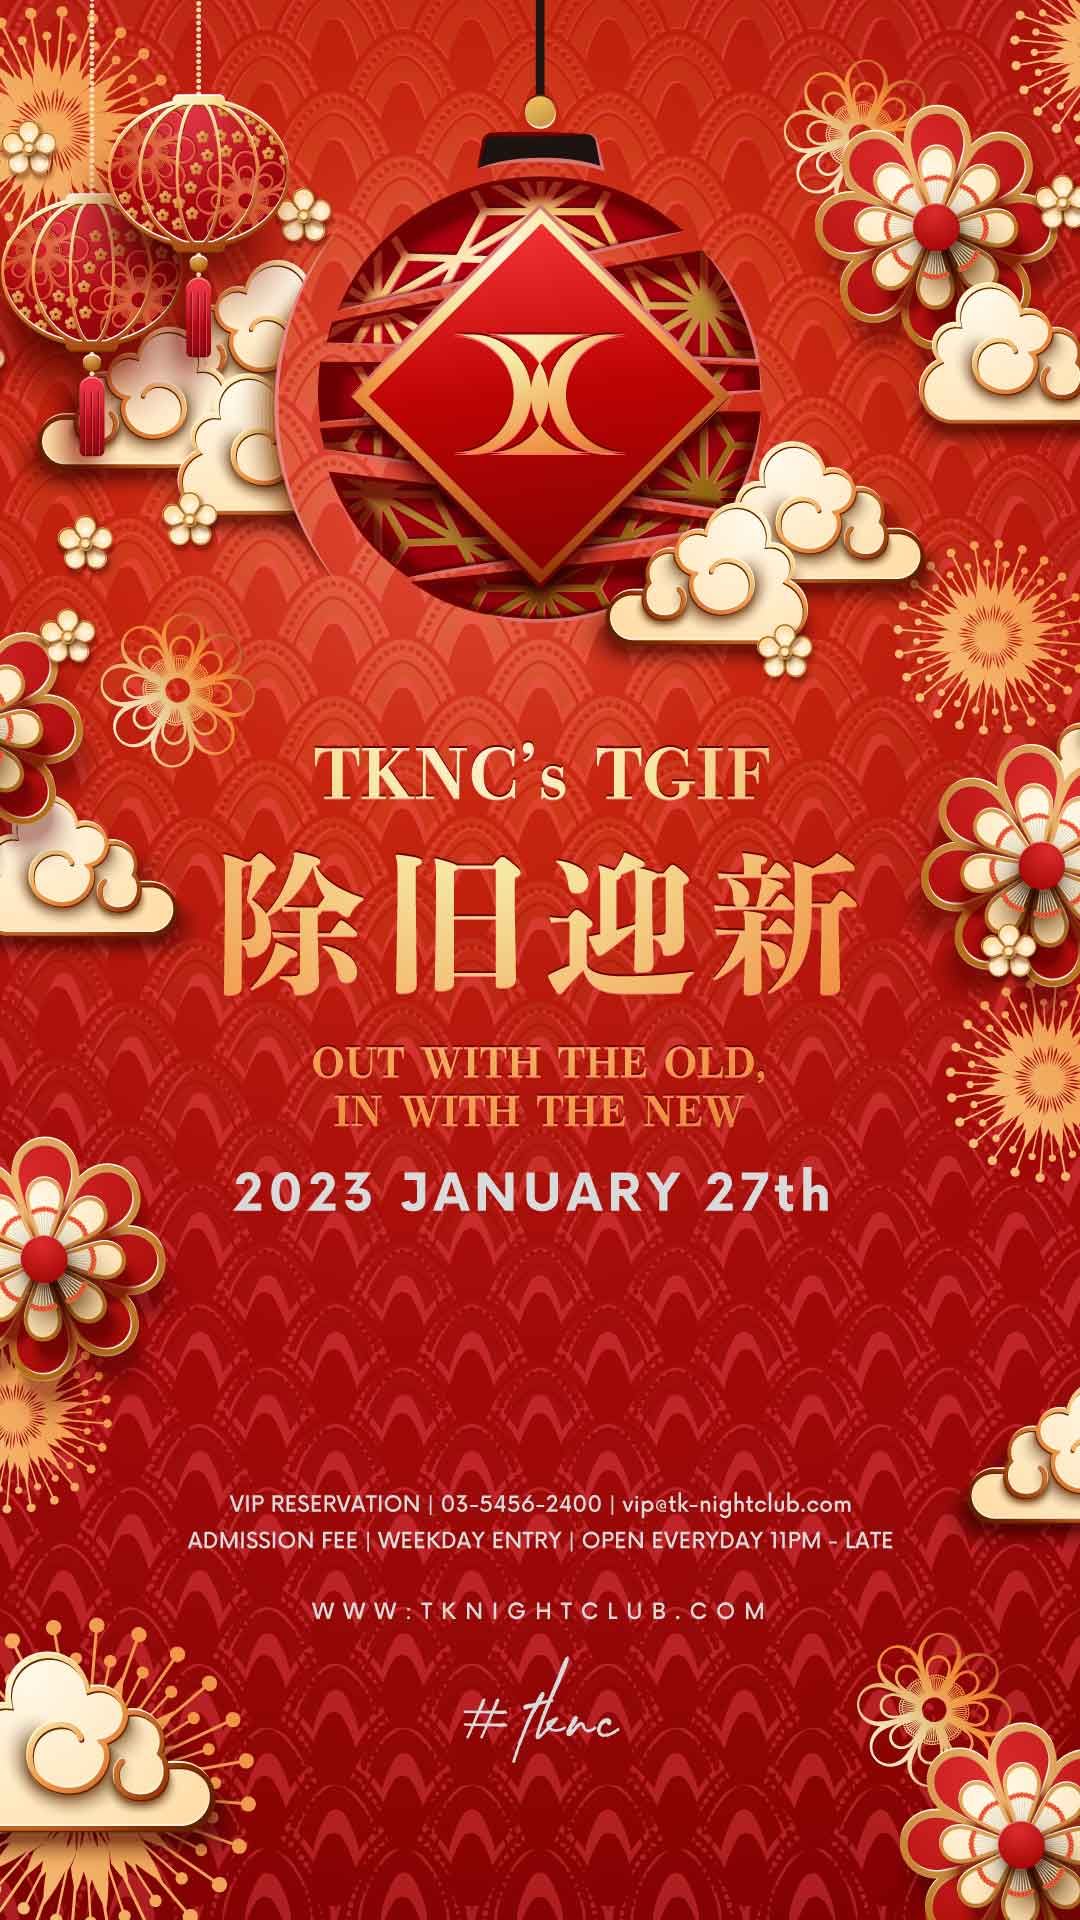 TKNC,s TGIF  除旧迎新 OUT WITH THE OLD,  IN WITH THE NEW